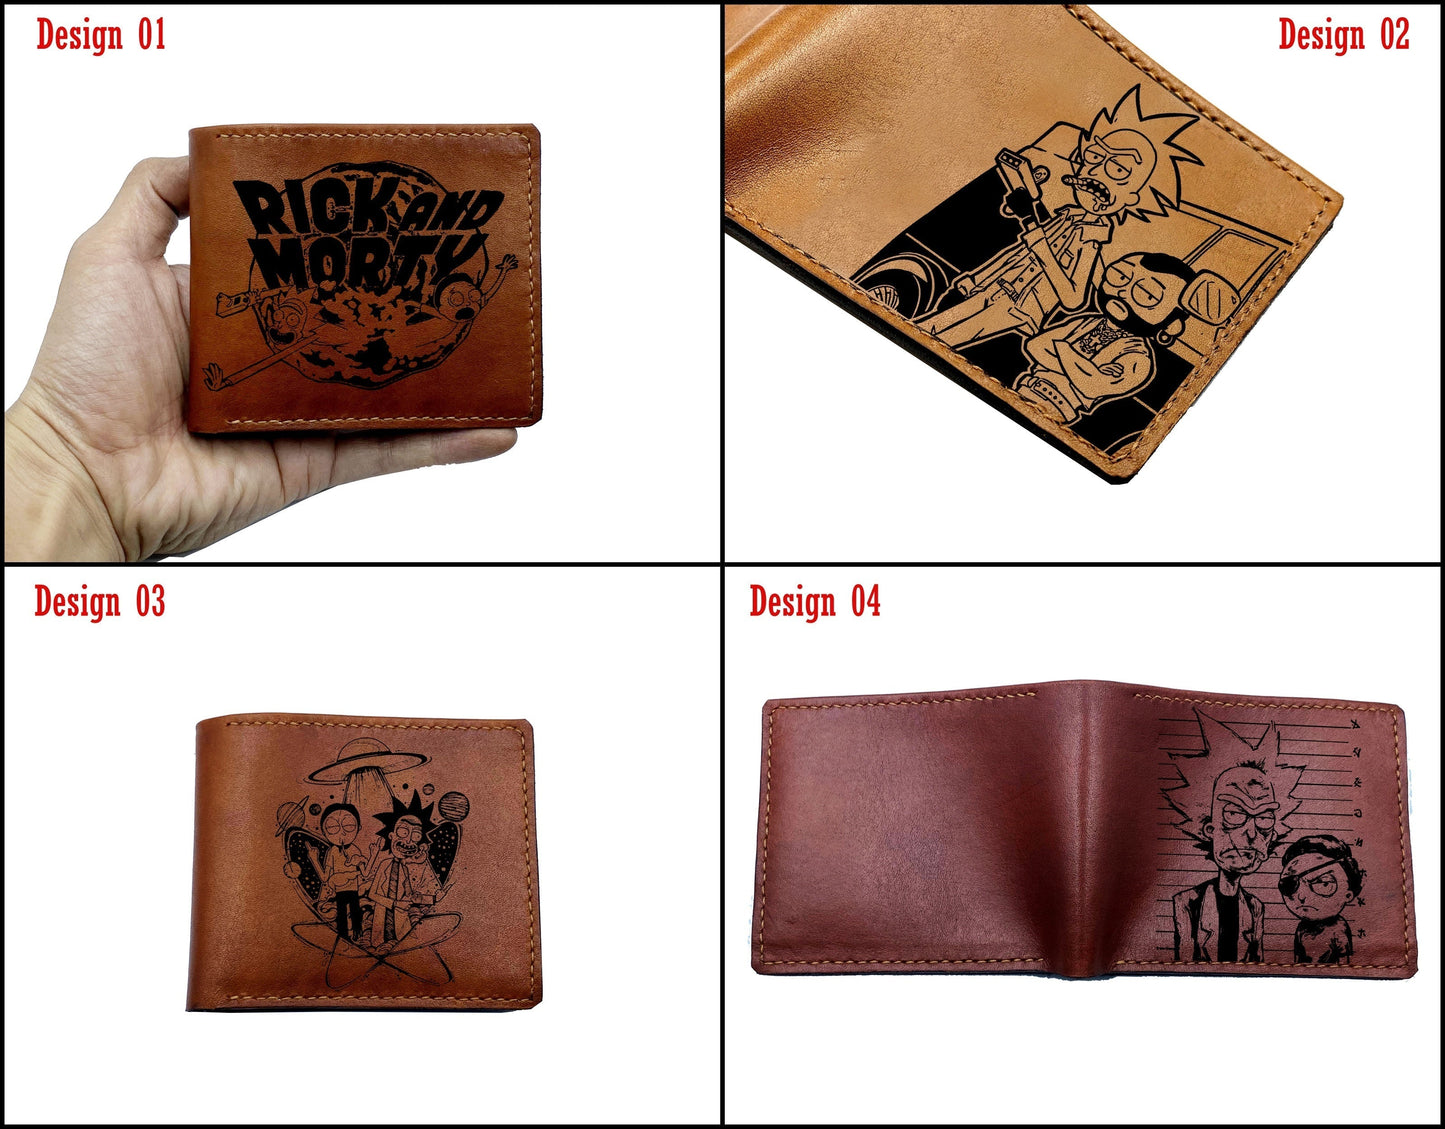 Mayan Corner - Rick and Morty movie series characters leather men's wallet, cartoon art wallet, cool leather gift for him - RM280105